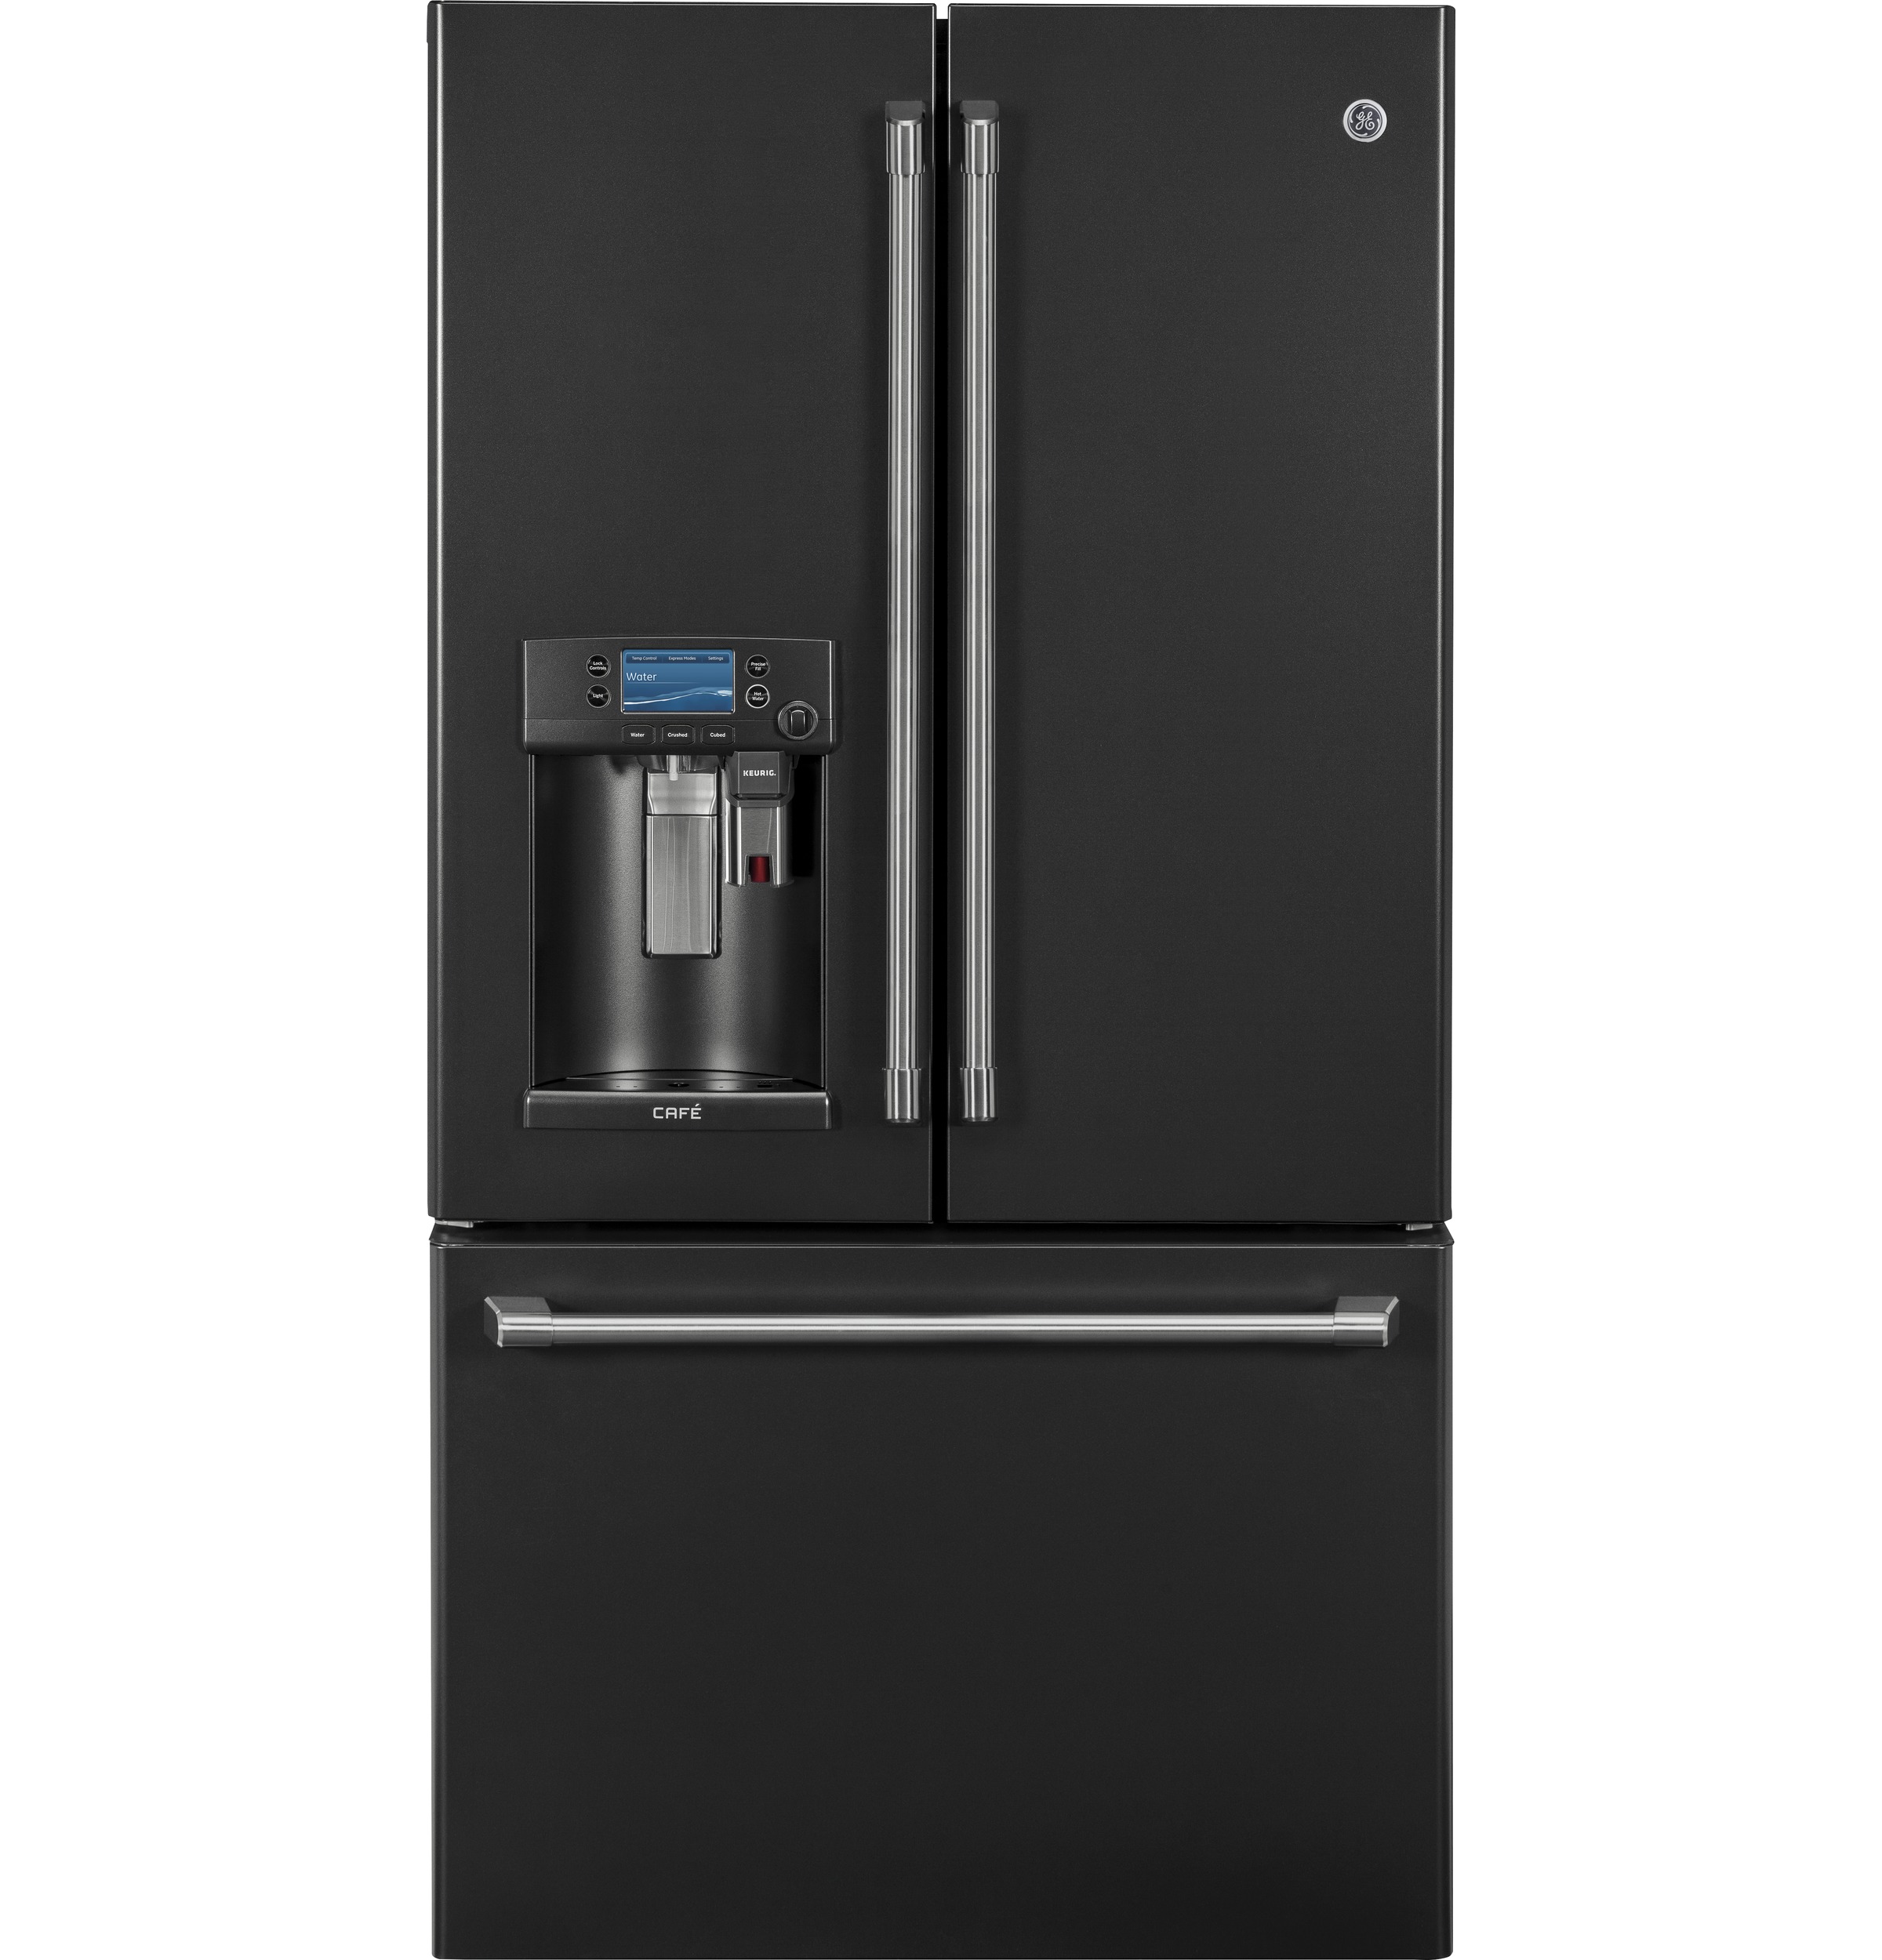 GE Café™ Series ENERGY STAR® 22.2 Cu. Ft. Counter-Depth French-Door Refrigerator with Keurig® K-Cup® Brewing System